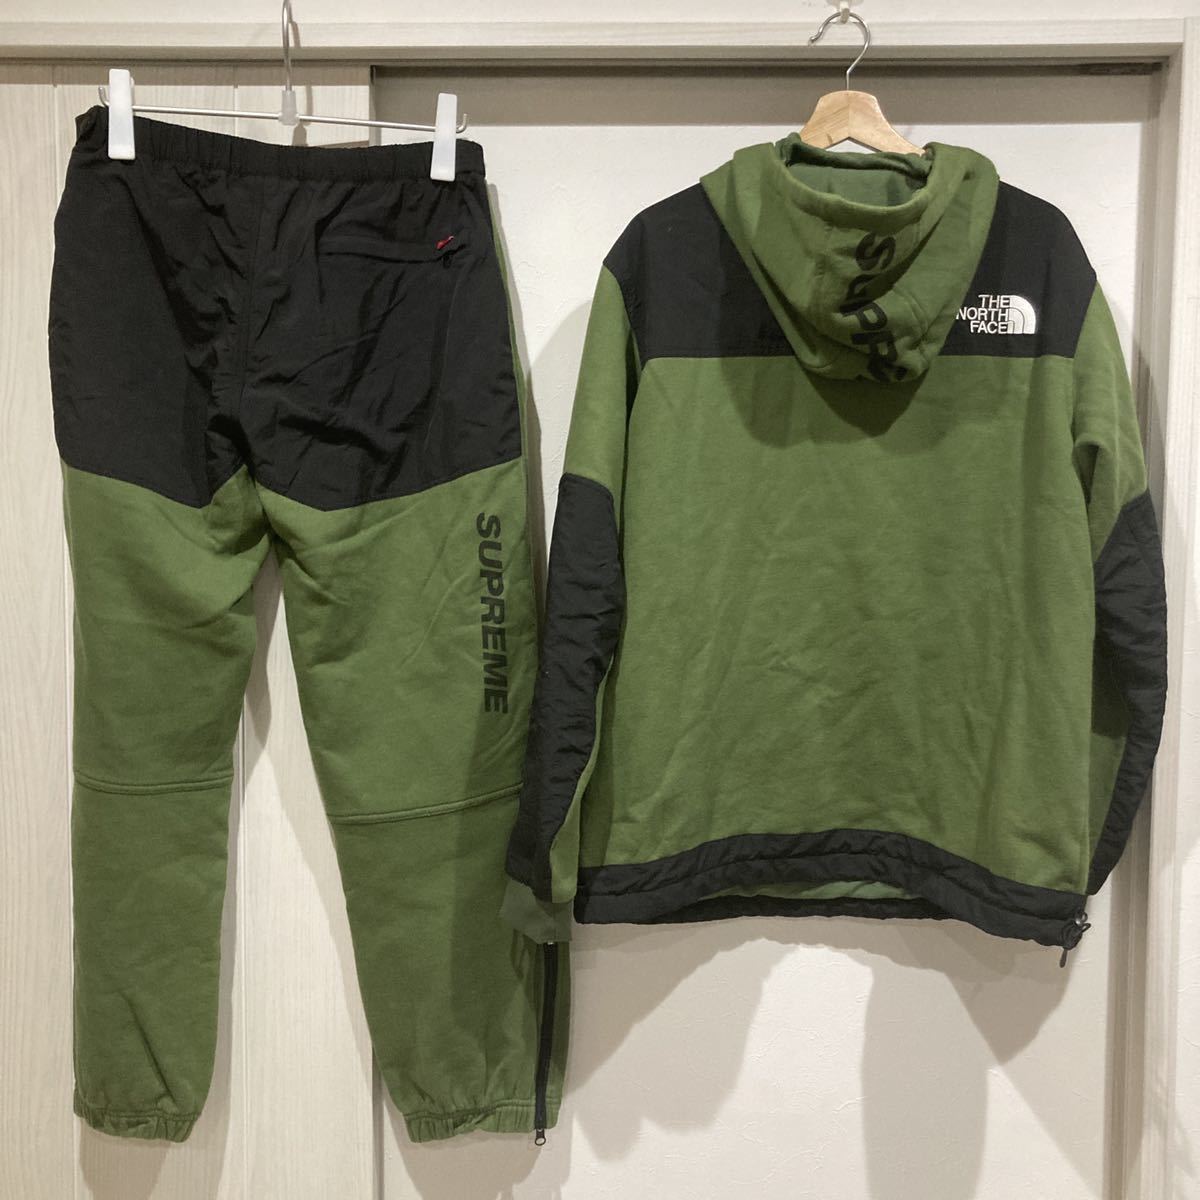 OUTLET SALE THE NORTH FACE supreme STEEP TECH セットアップ